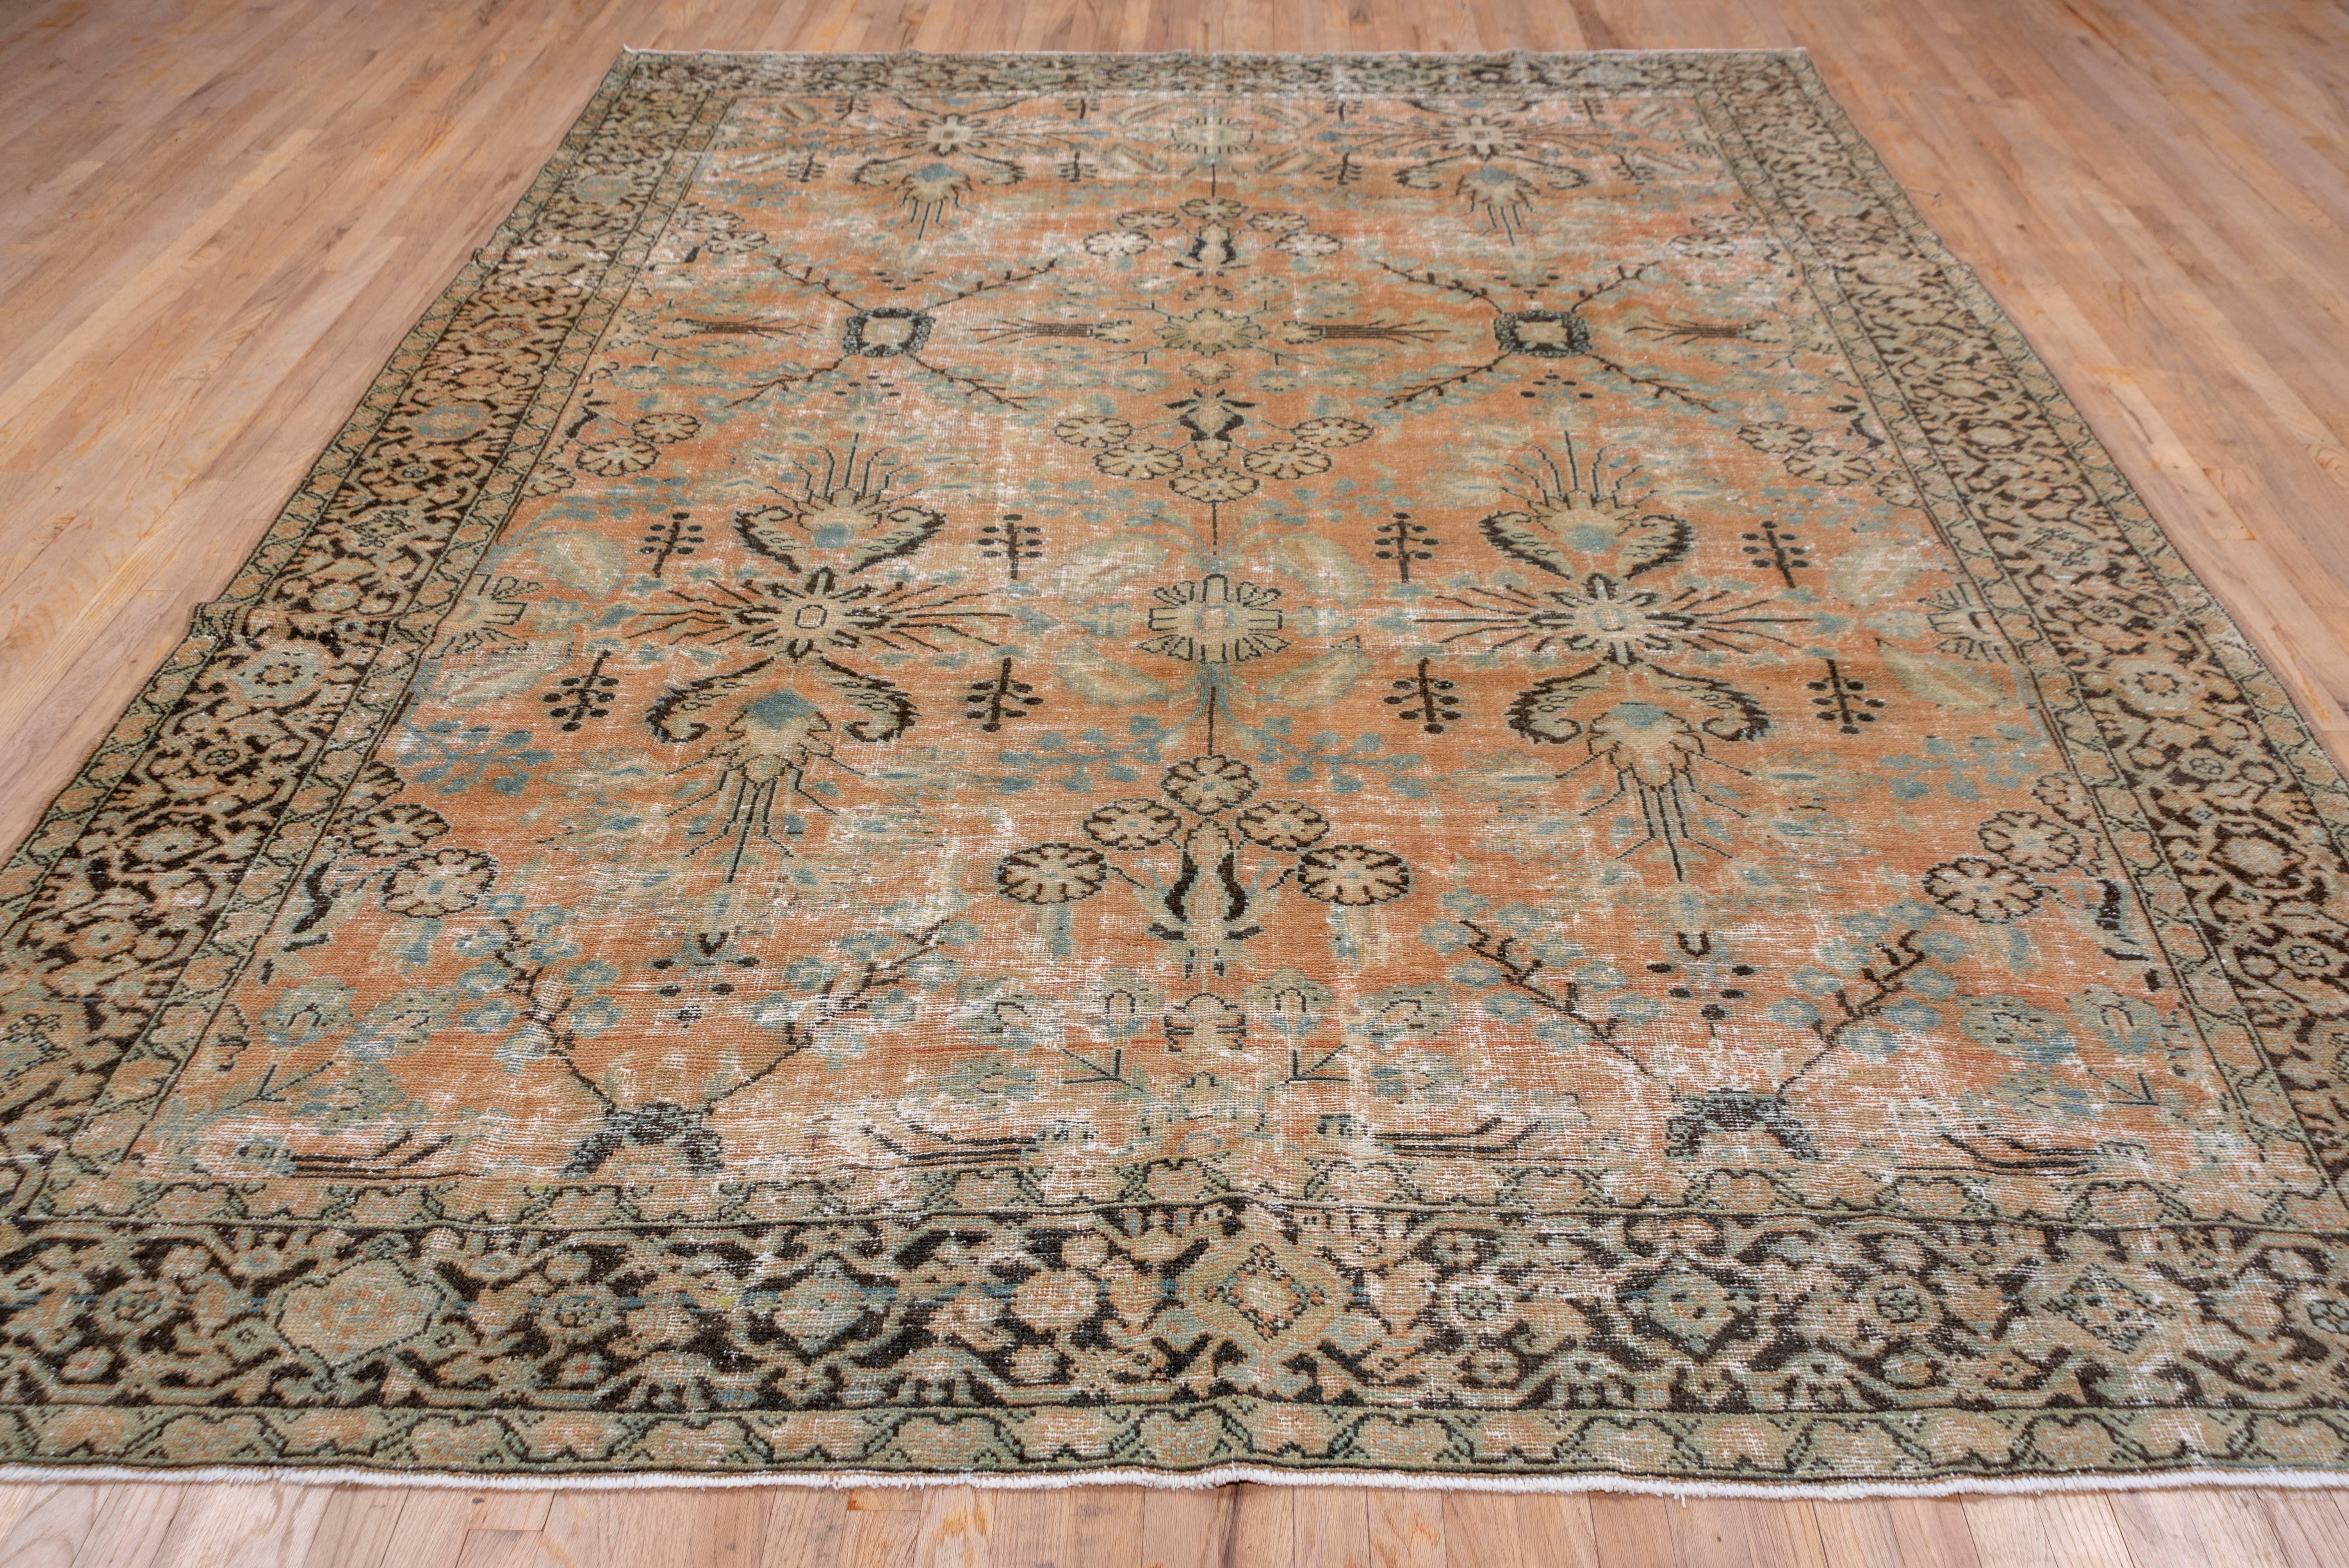 This predominantly light colored west Persian village carpet has a burnt pale apricot field with a spacious, large pattern design of rosettes, floral sprays and small complete flowers. There are a few teal accents. The brick main border displays